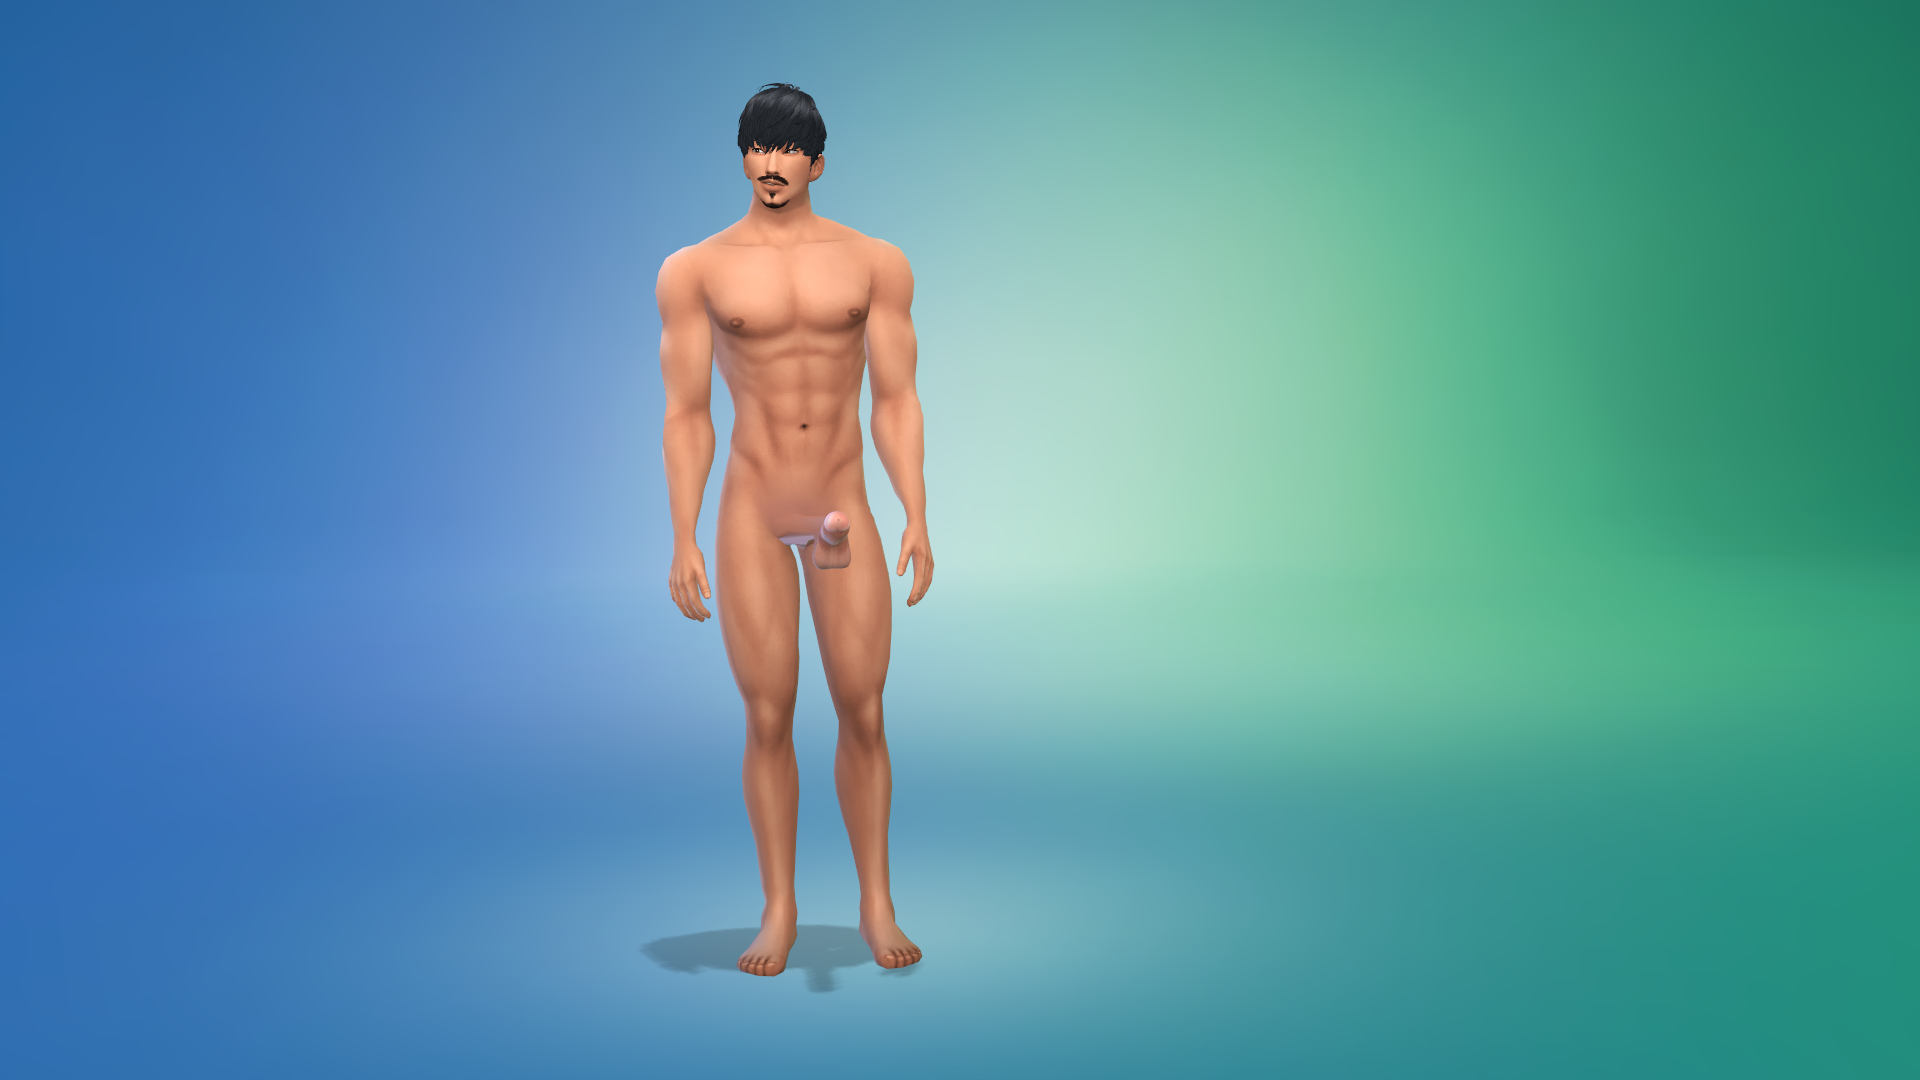 Sims 4 Pornstar Cock V40 Ww Rigged 20190417 Page 24 Downloads The Sims 4